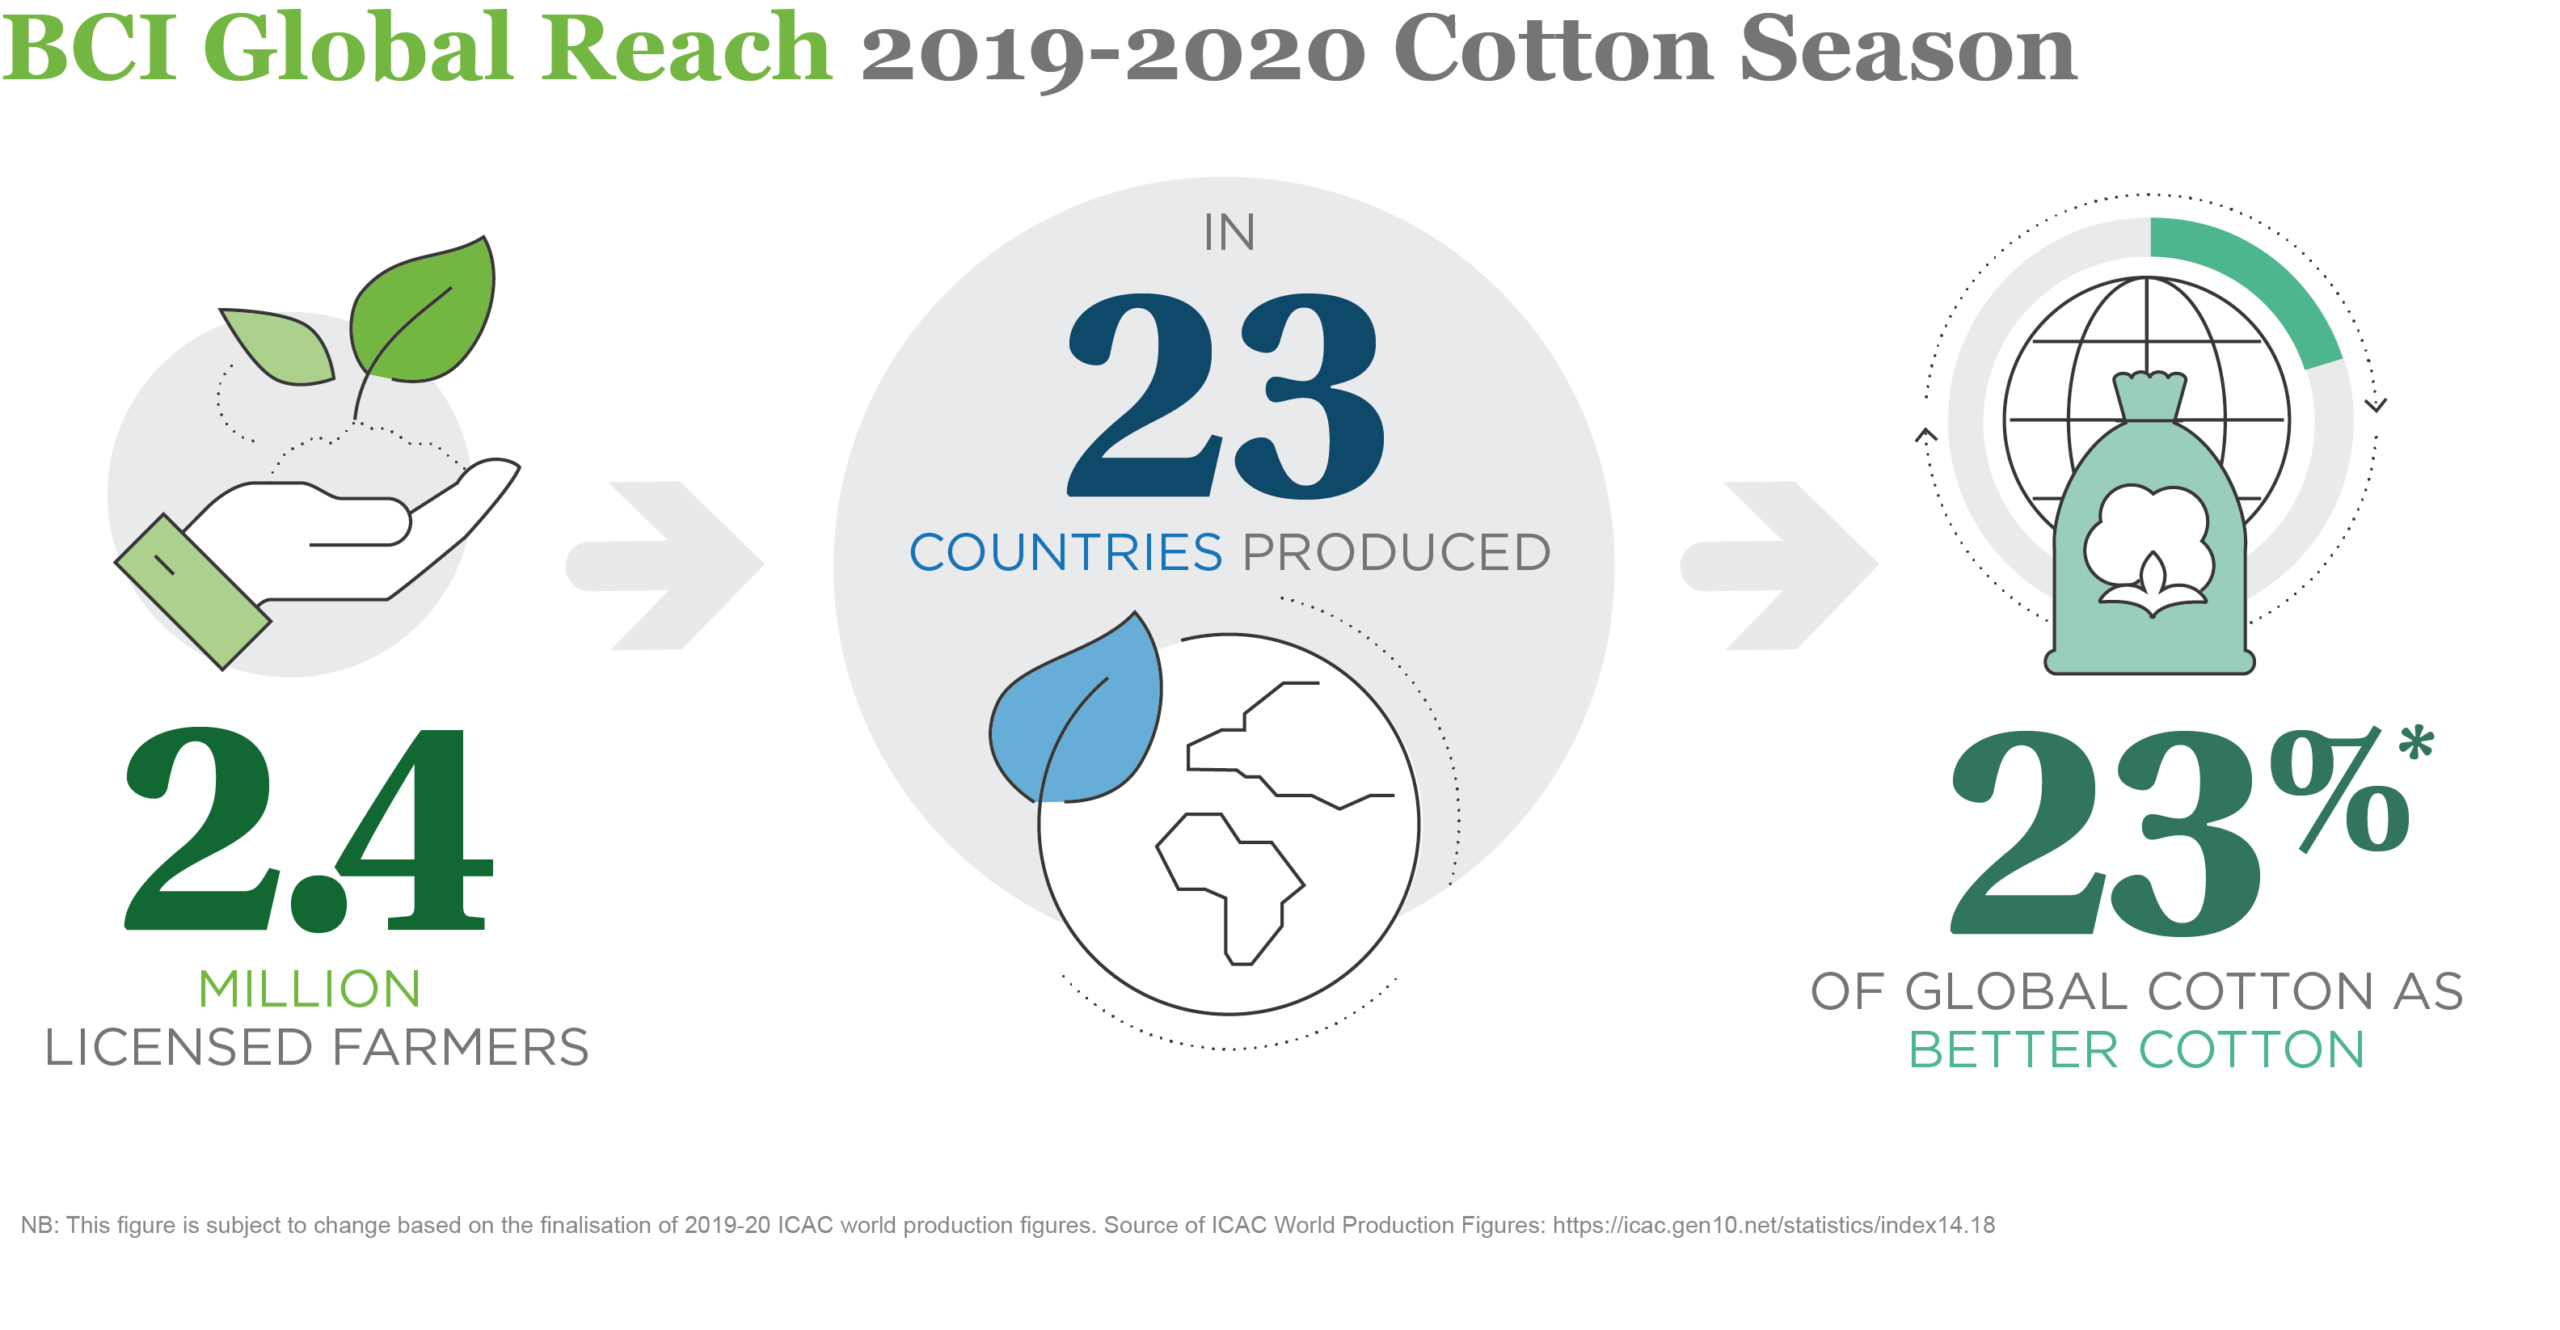 2.7 Million Cotton Farmers Grow Nearly a Quarter of Global Cotton More  Sustainably - Better Cotton